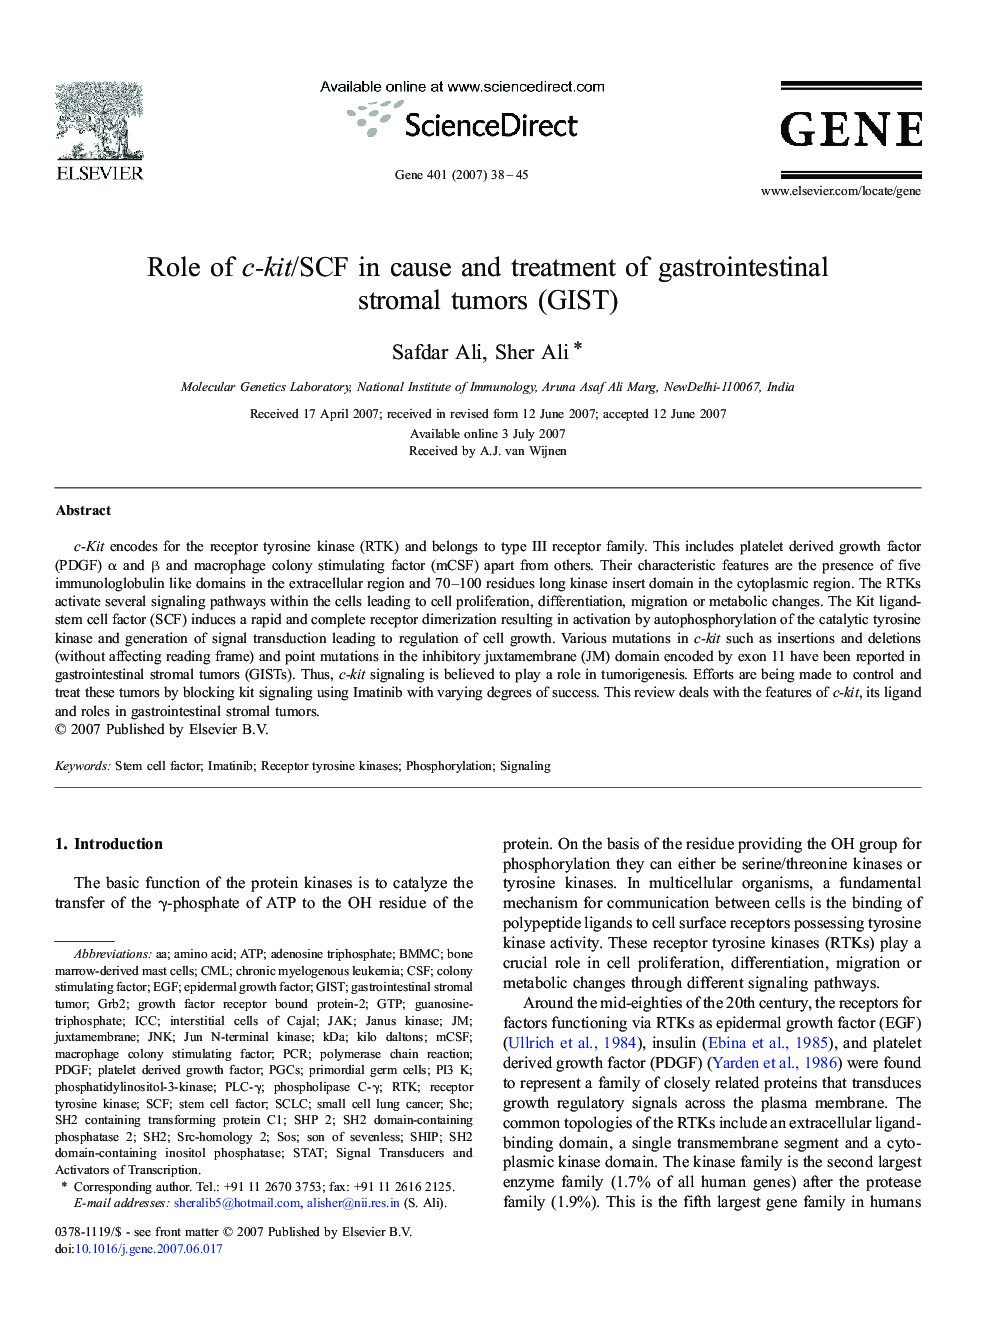 Role of c-kit/SCF in cause and treatment of gastrointestinal stromal tumors (GIST)